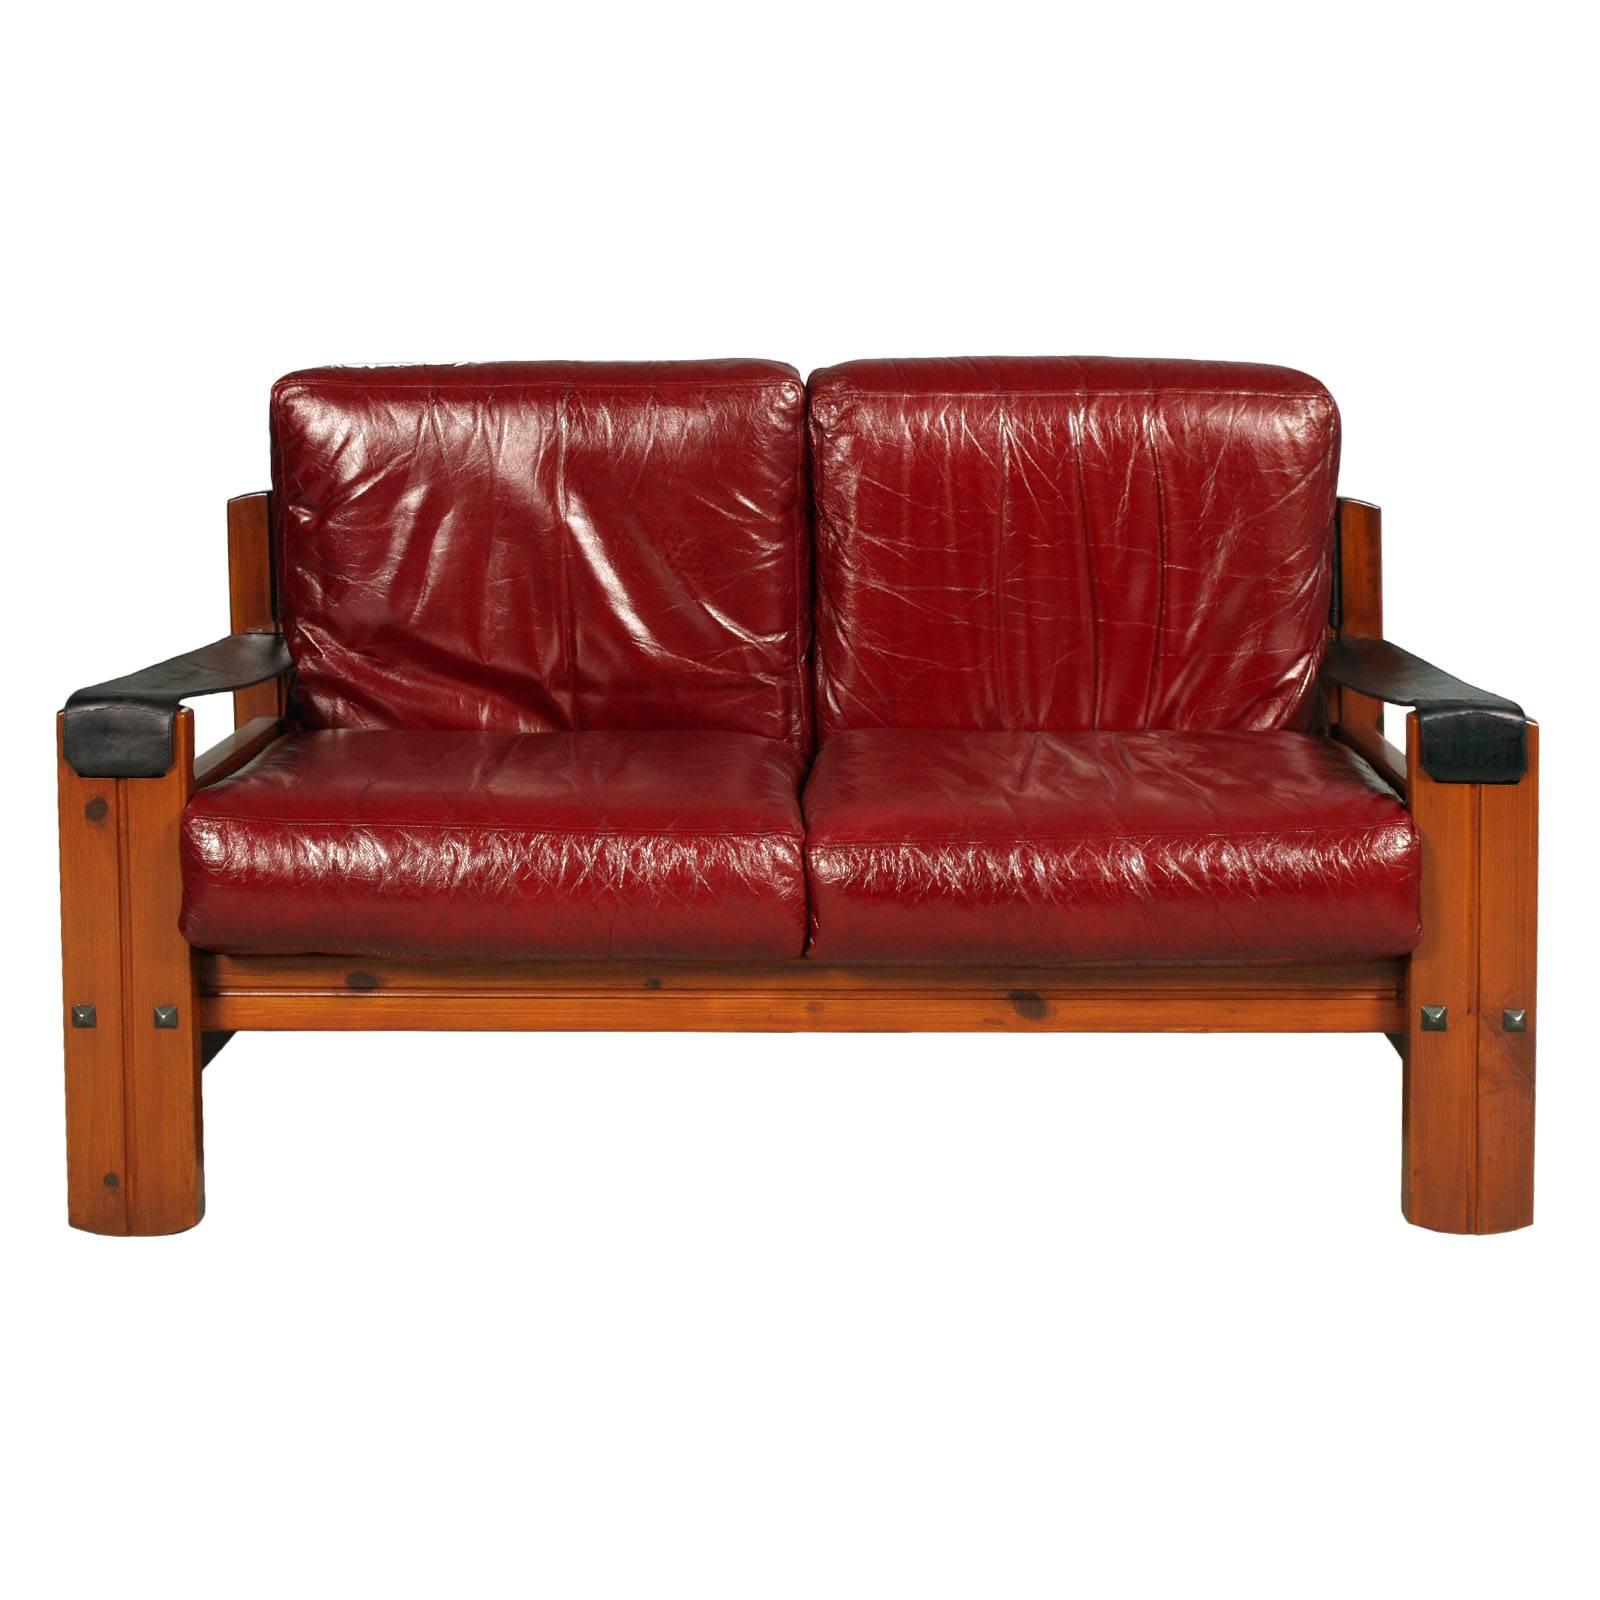 They can be sold separately
1960s Leaving room set in massive Wood, real leather, attributed to Afra and Tobia Scarpa  designers
These are particular famous and fabulous complete set for living room of widespread fashion in the 60s, in massive wood,